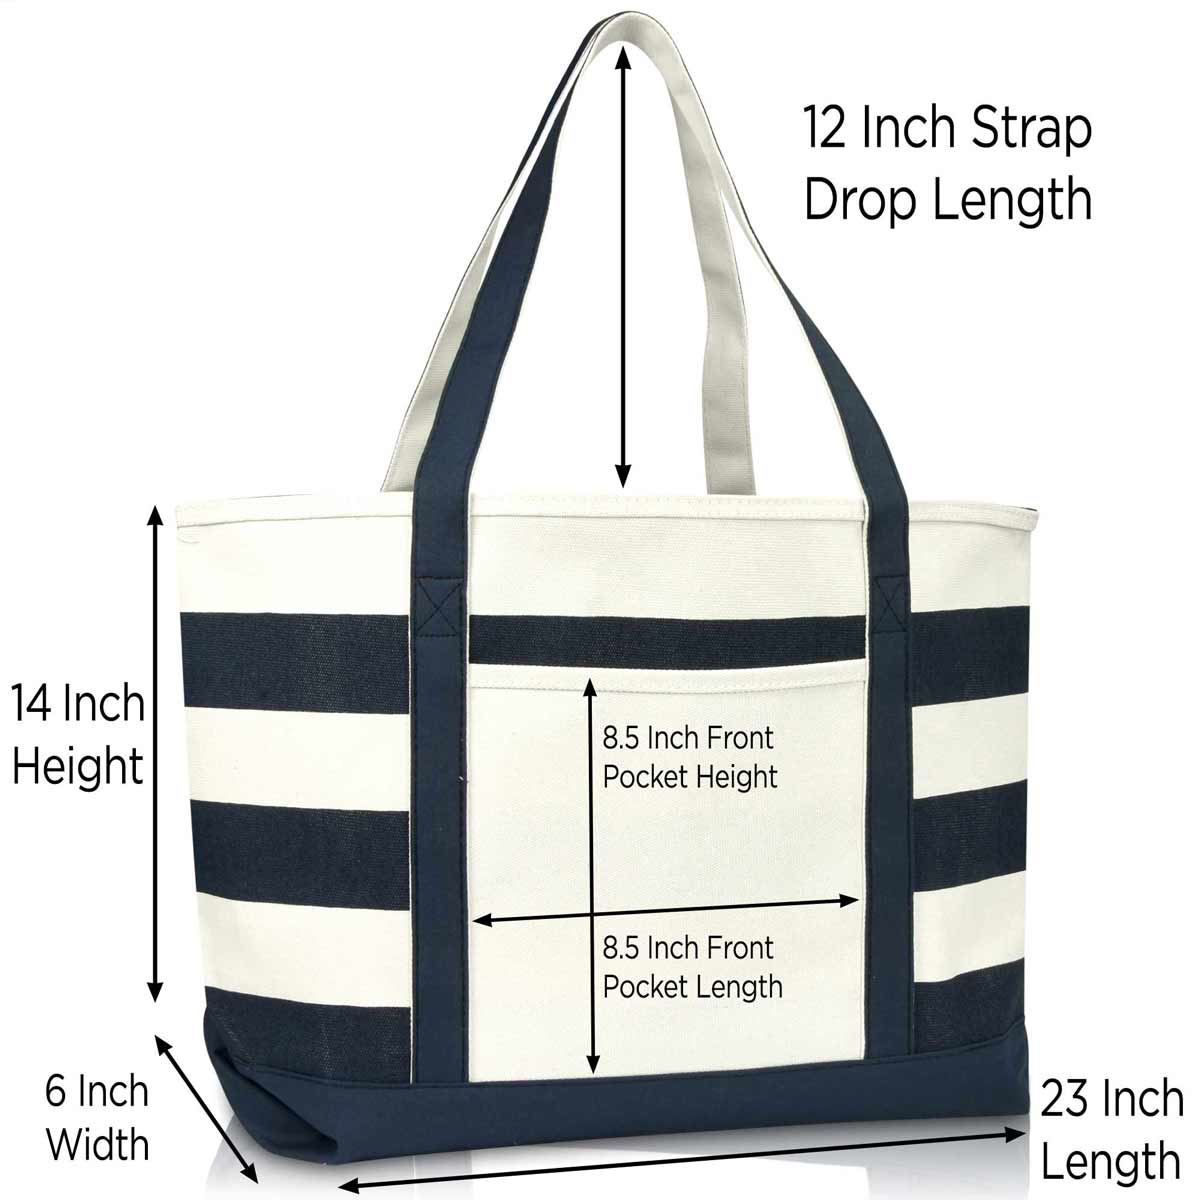 Board Bags - Gresham Marine - Protect your blades with a padded blade bag